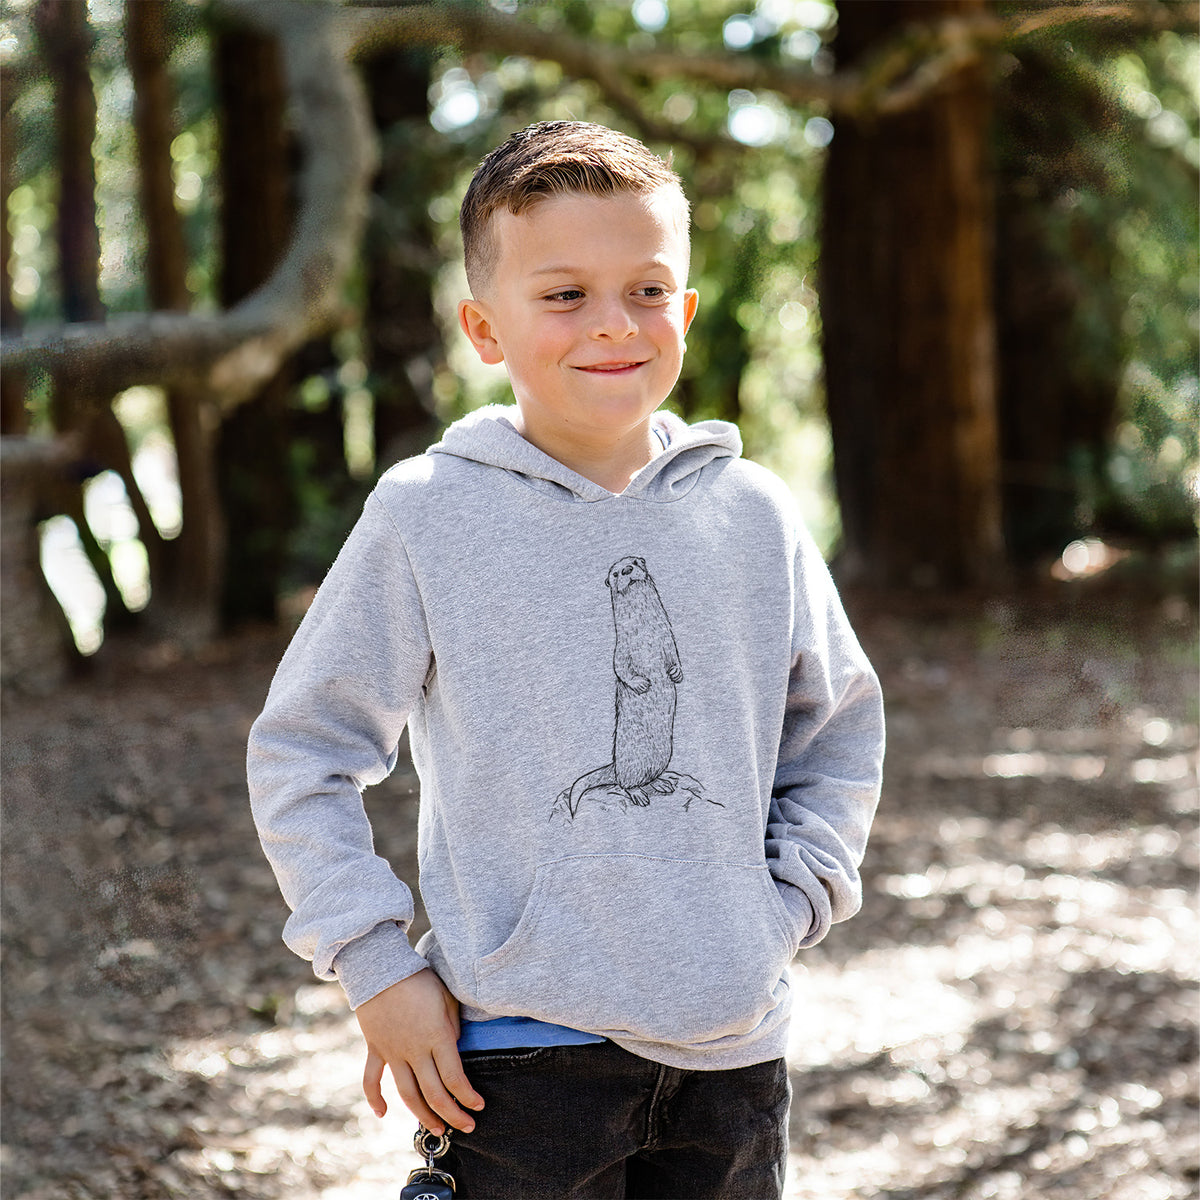 North American River Otter - Lontra canadensis - Youth Hoodie Sweatshirt